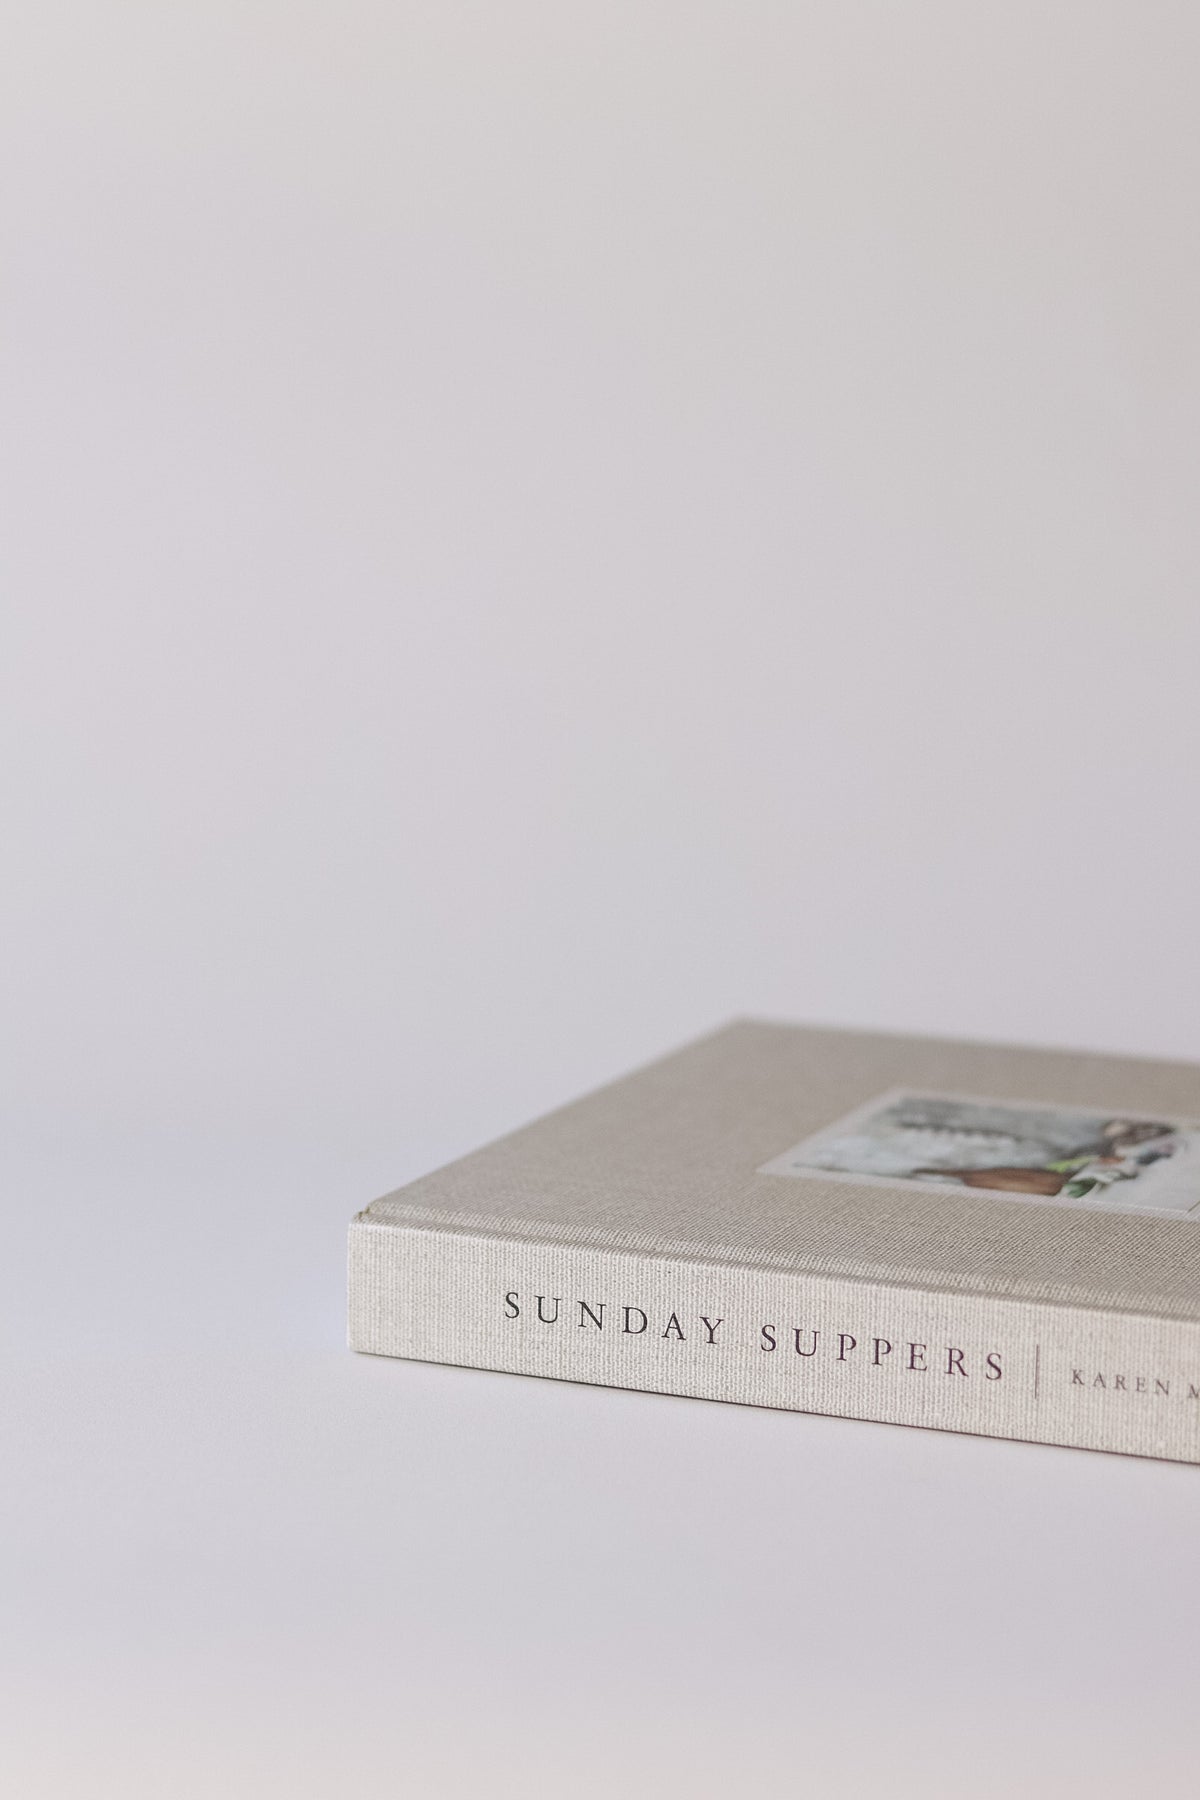 Sunday Suppers Book